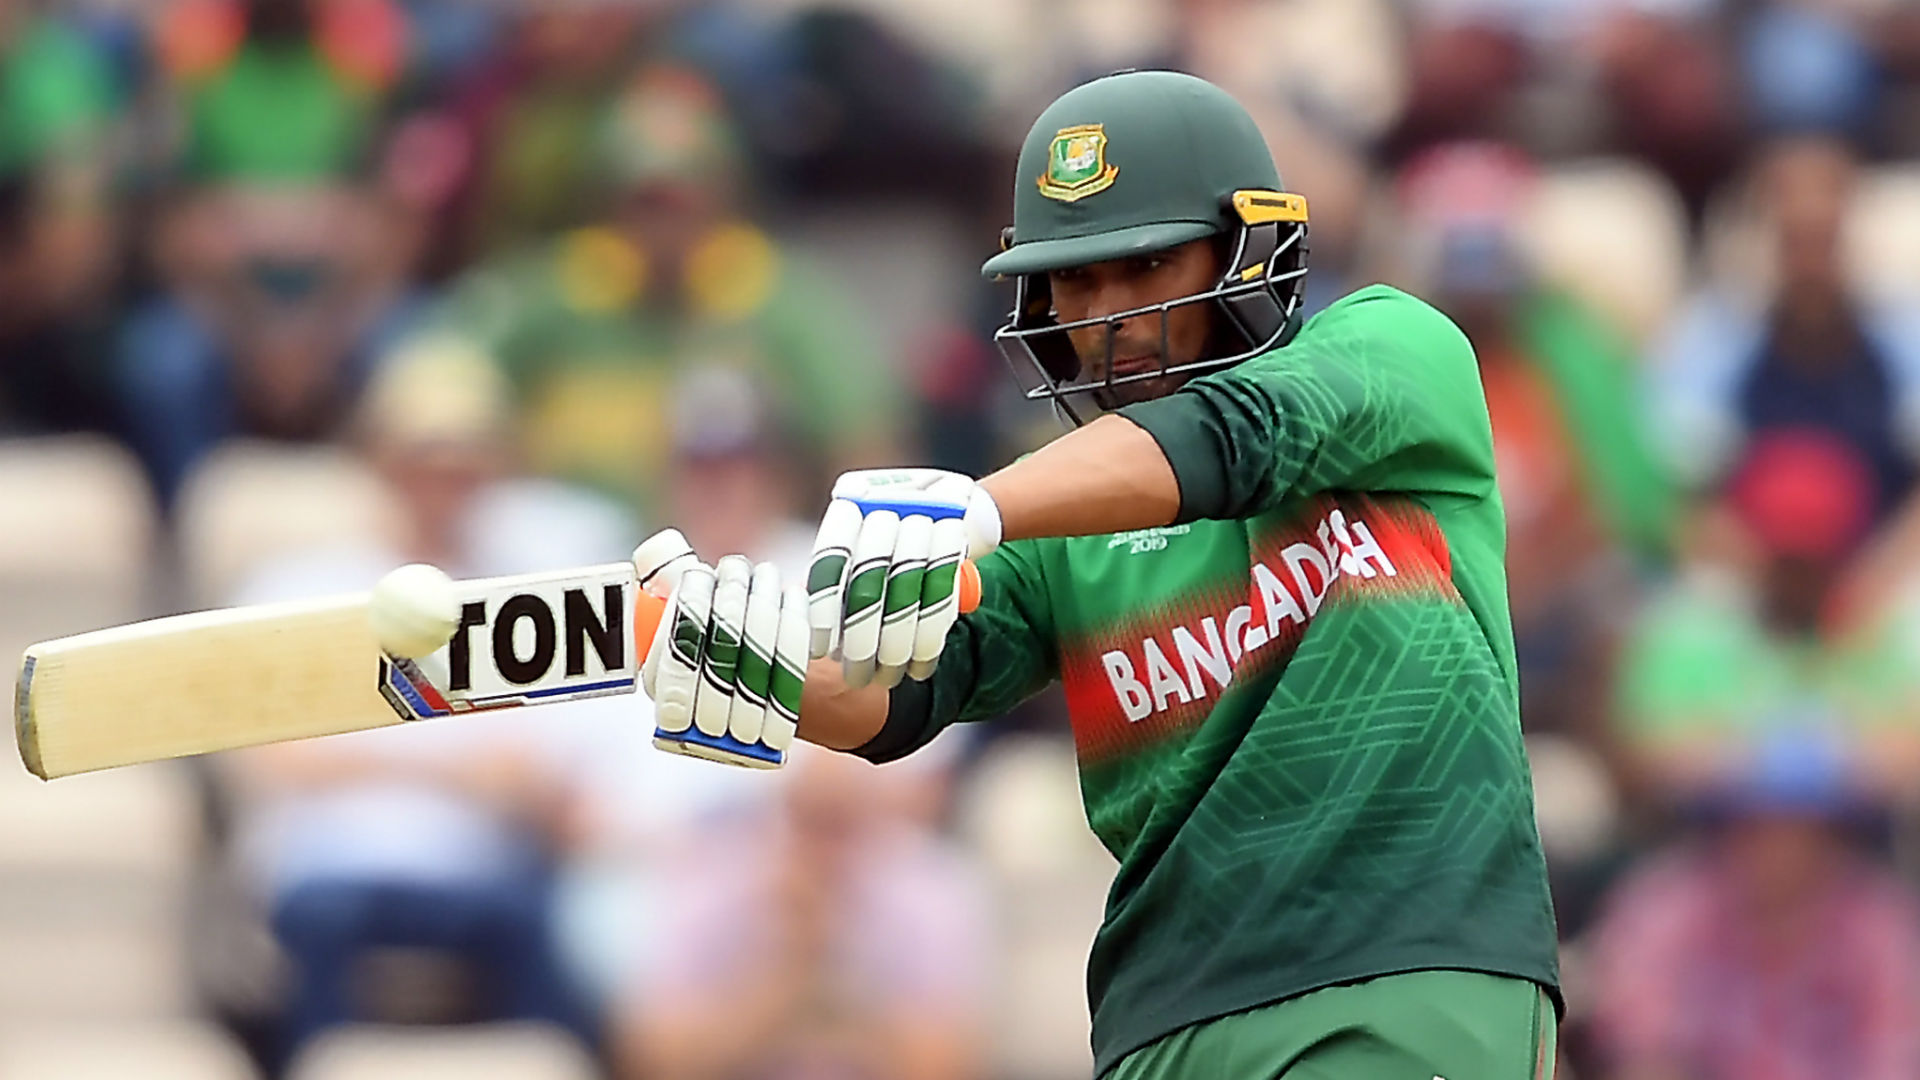 Mahmudullah hit 62 as Bangladesh clinched a 39-run victory over Zimbabwe to book their place in the T20 international tri-series final.